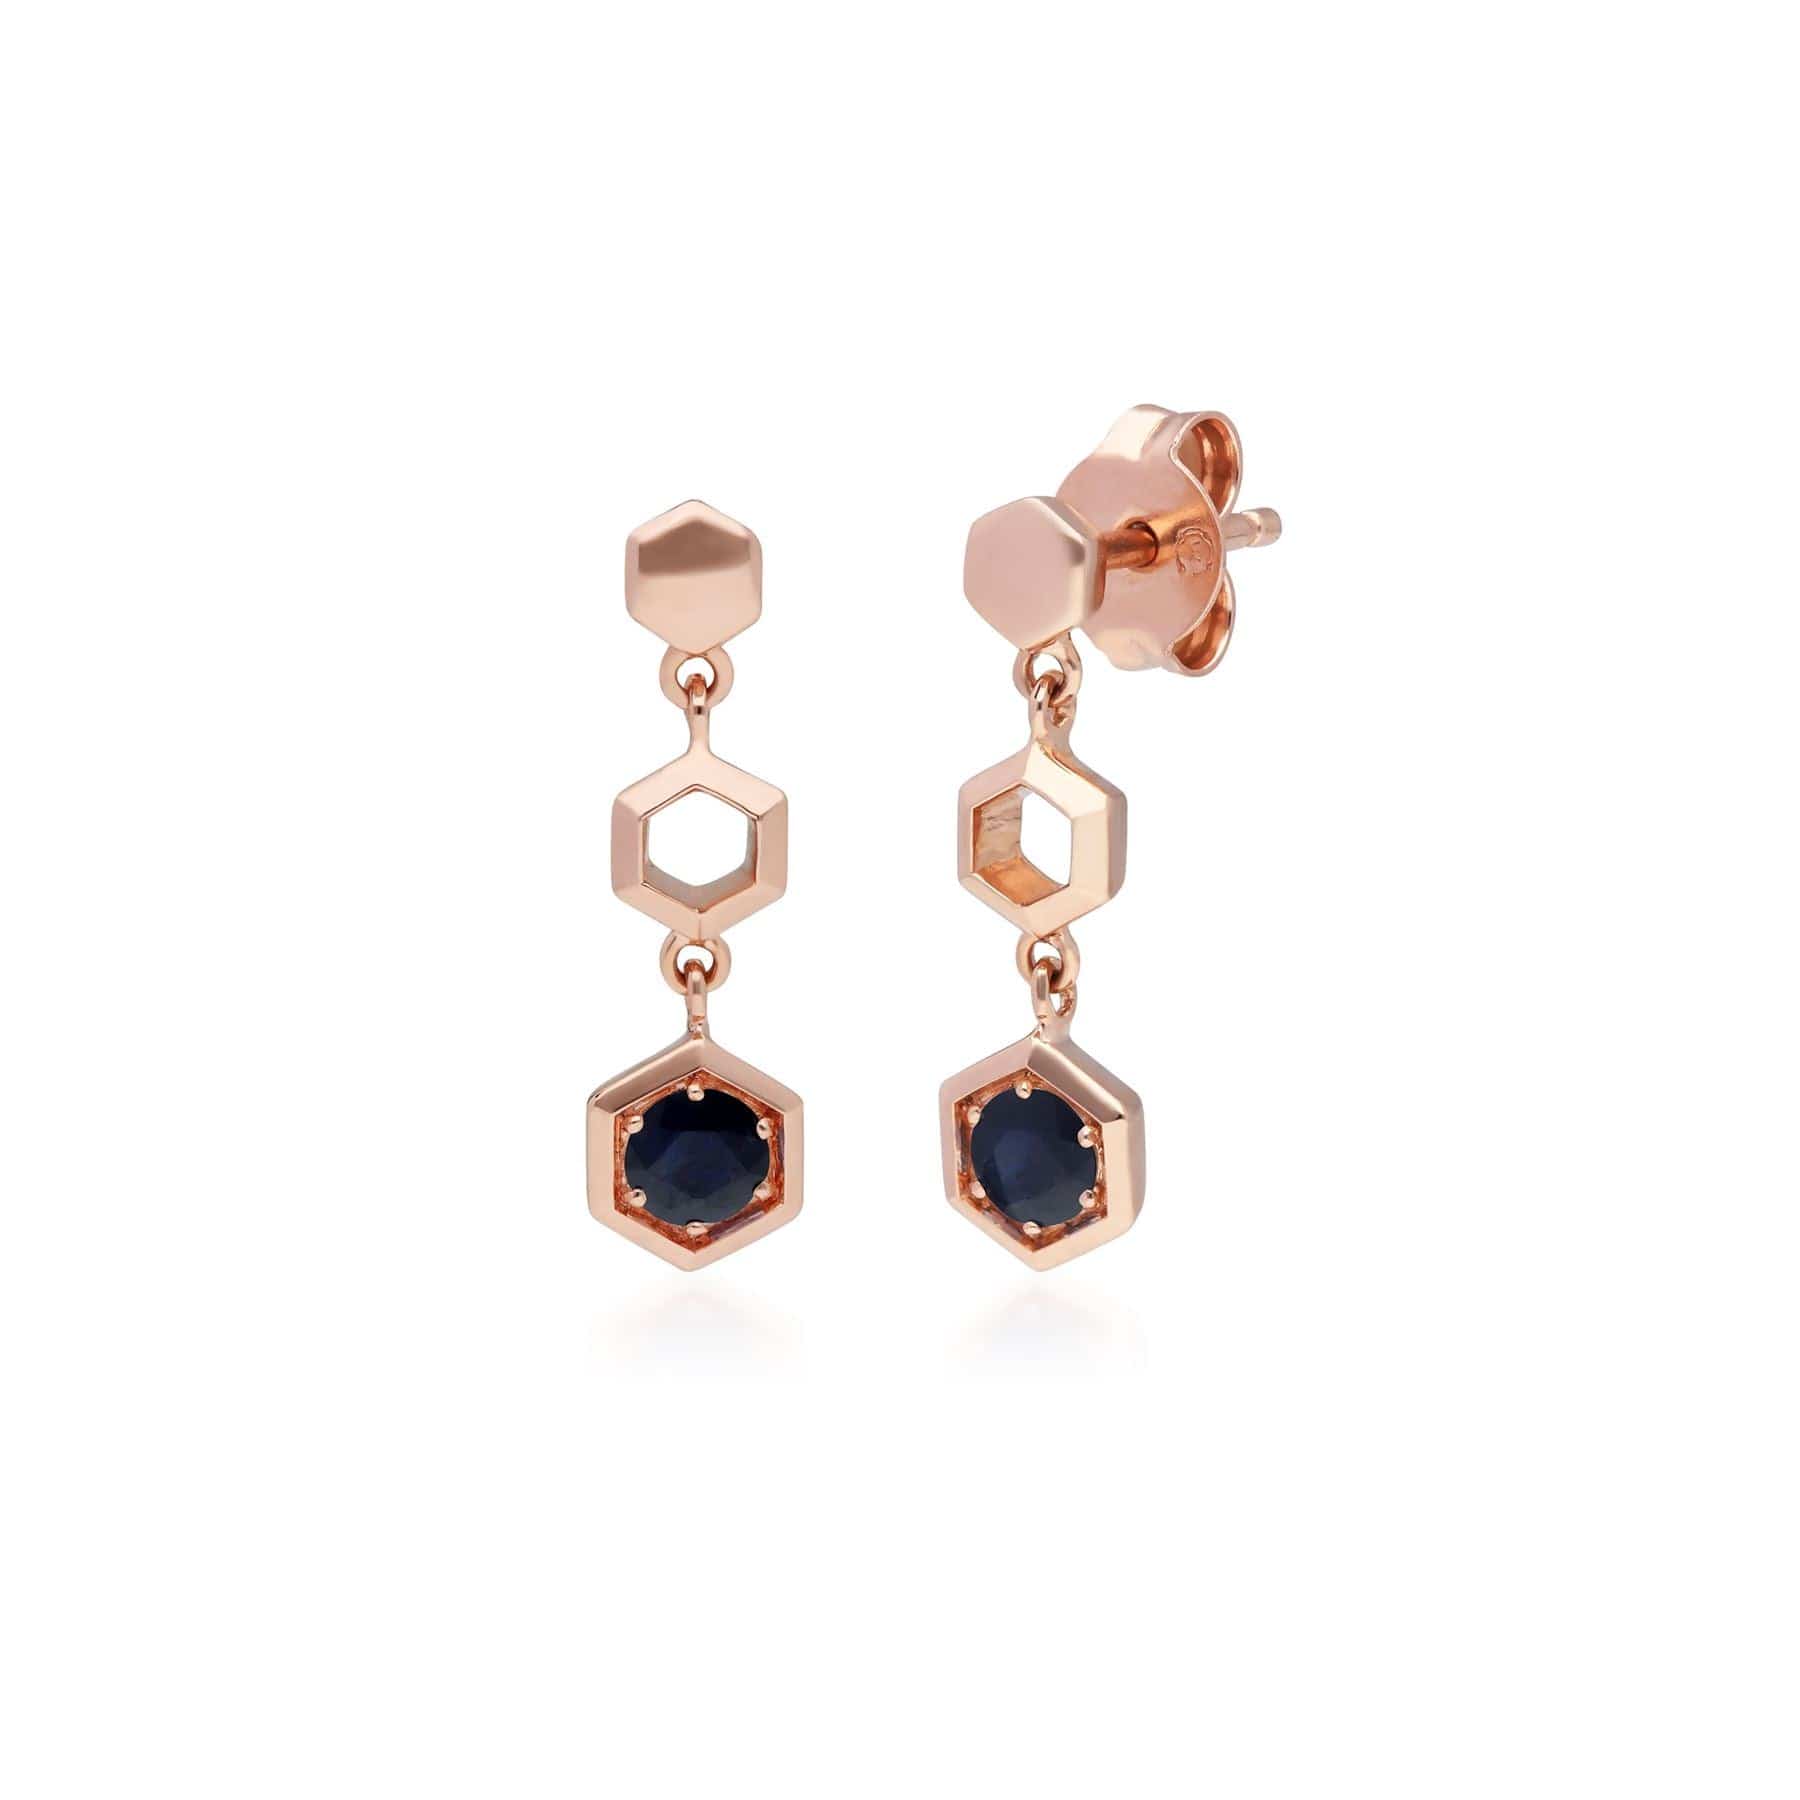 Photos - Earrings Honeycomb Inspired Blue Sapphire Drop  in 9ct Rose Gold